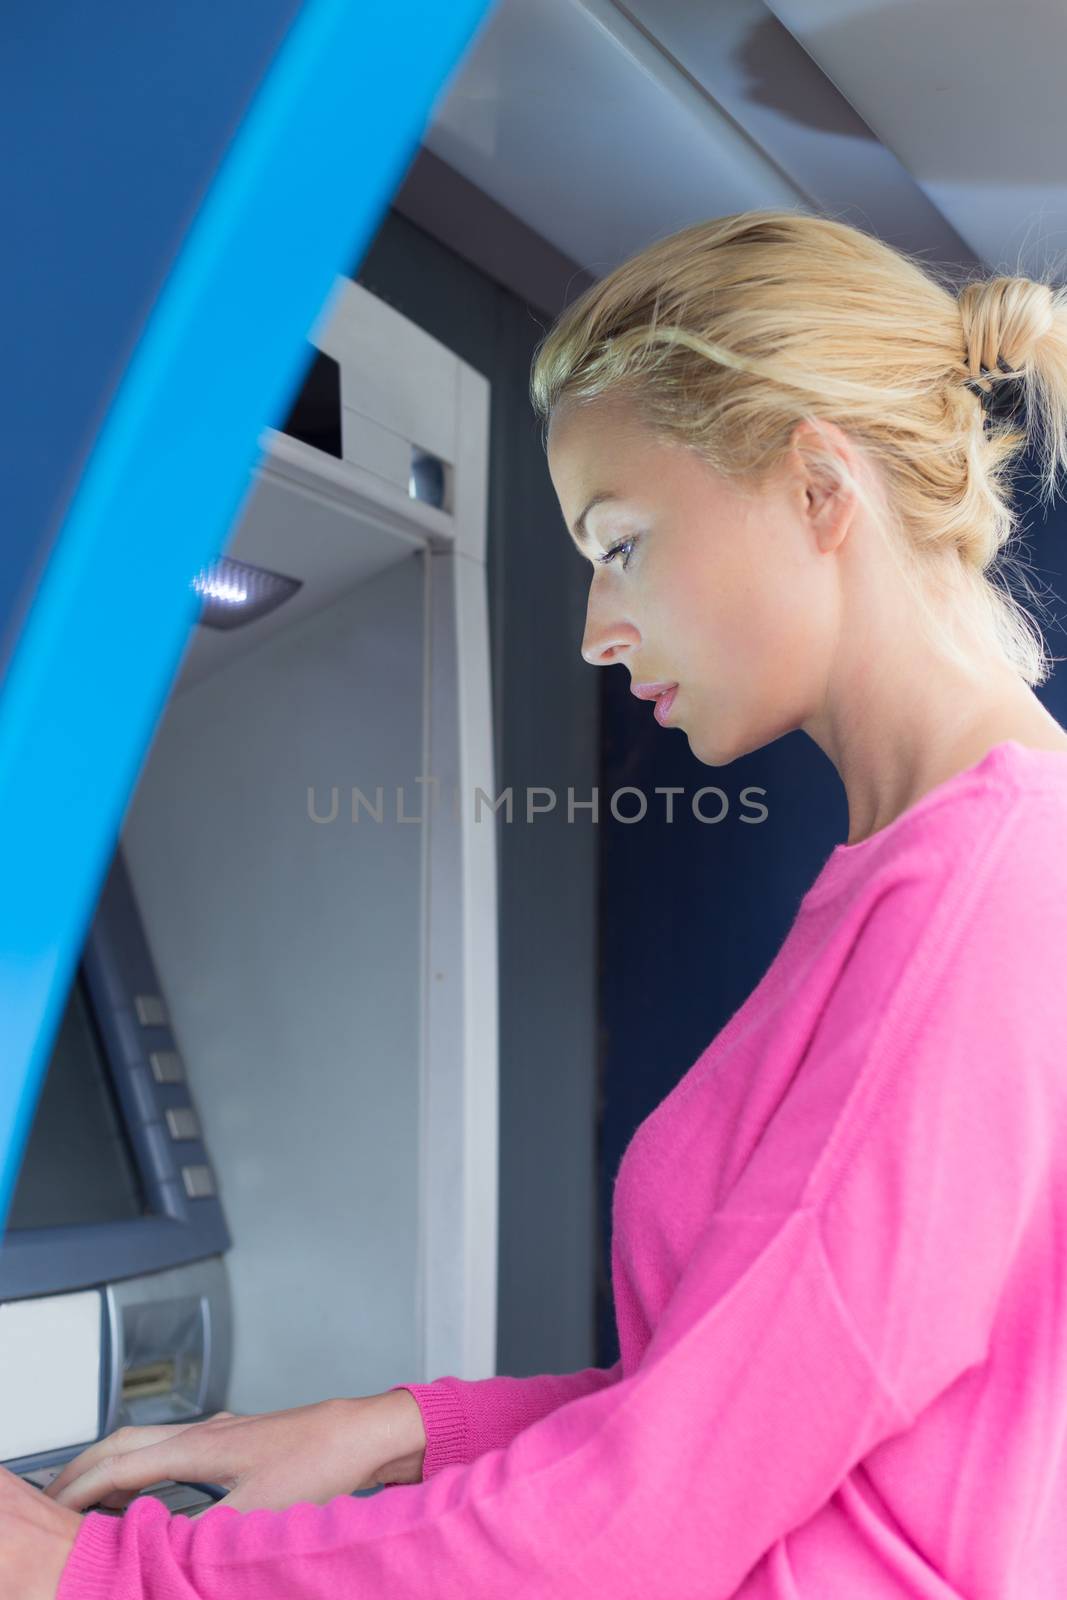 Lady using an atm counter by kasto